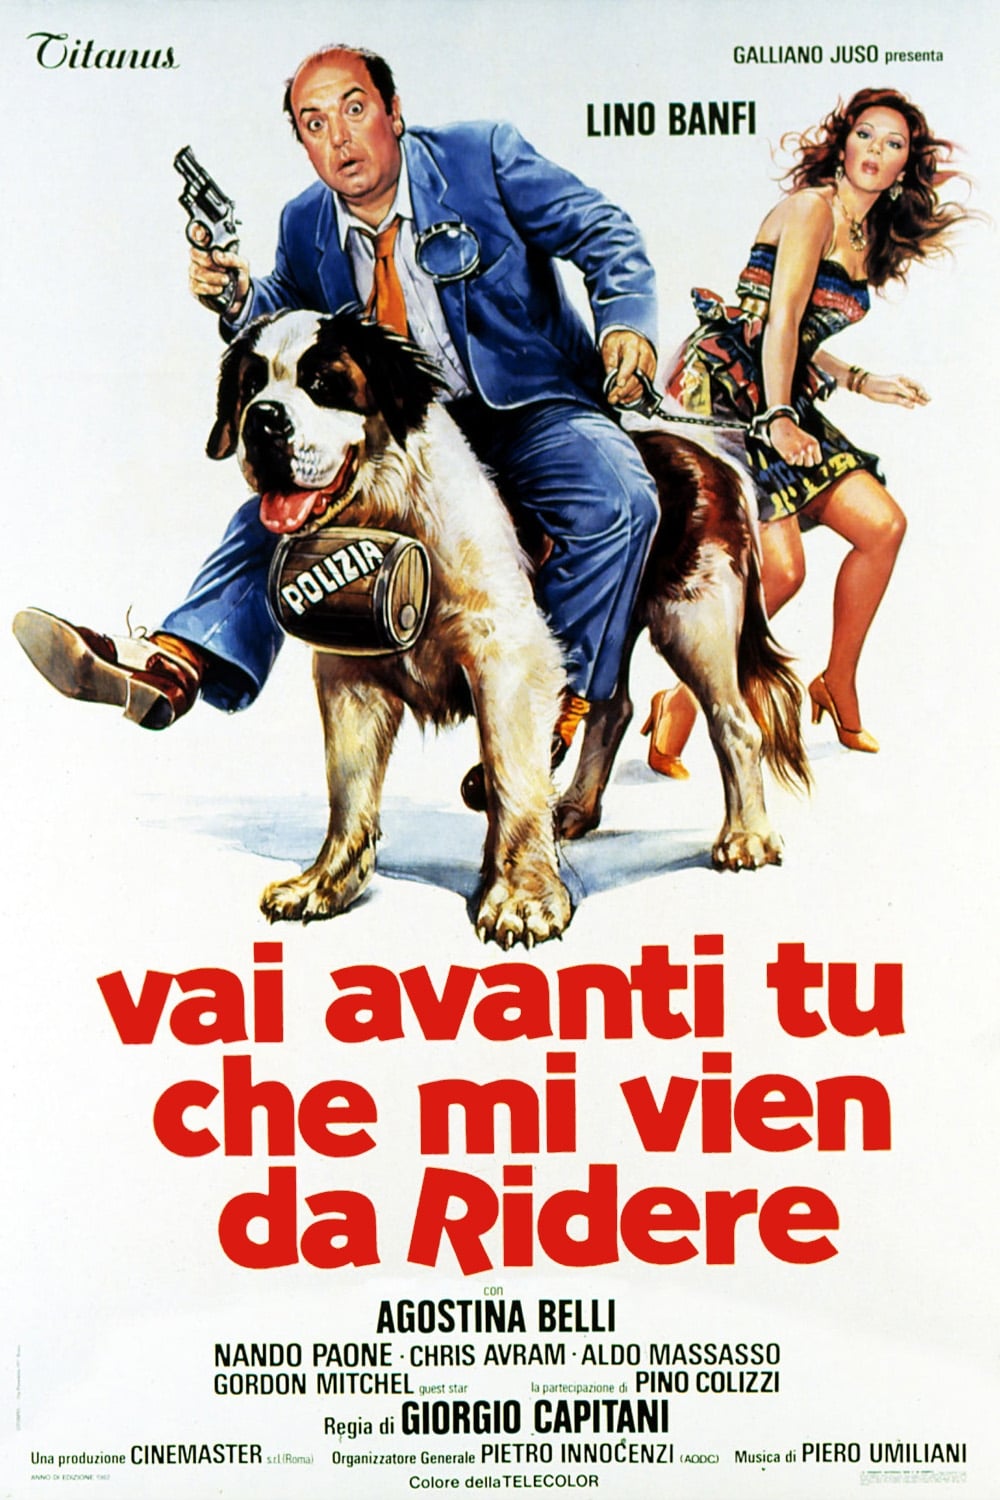 The Yellow Panther (1982)